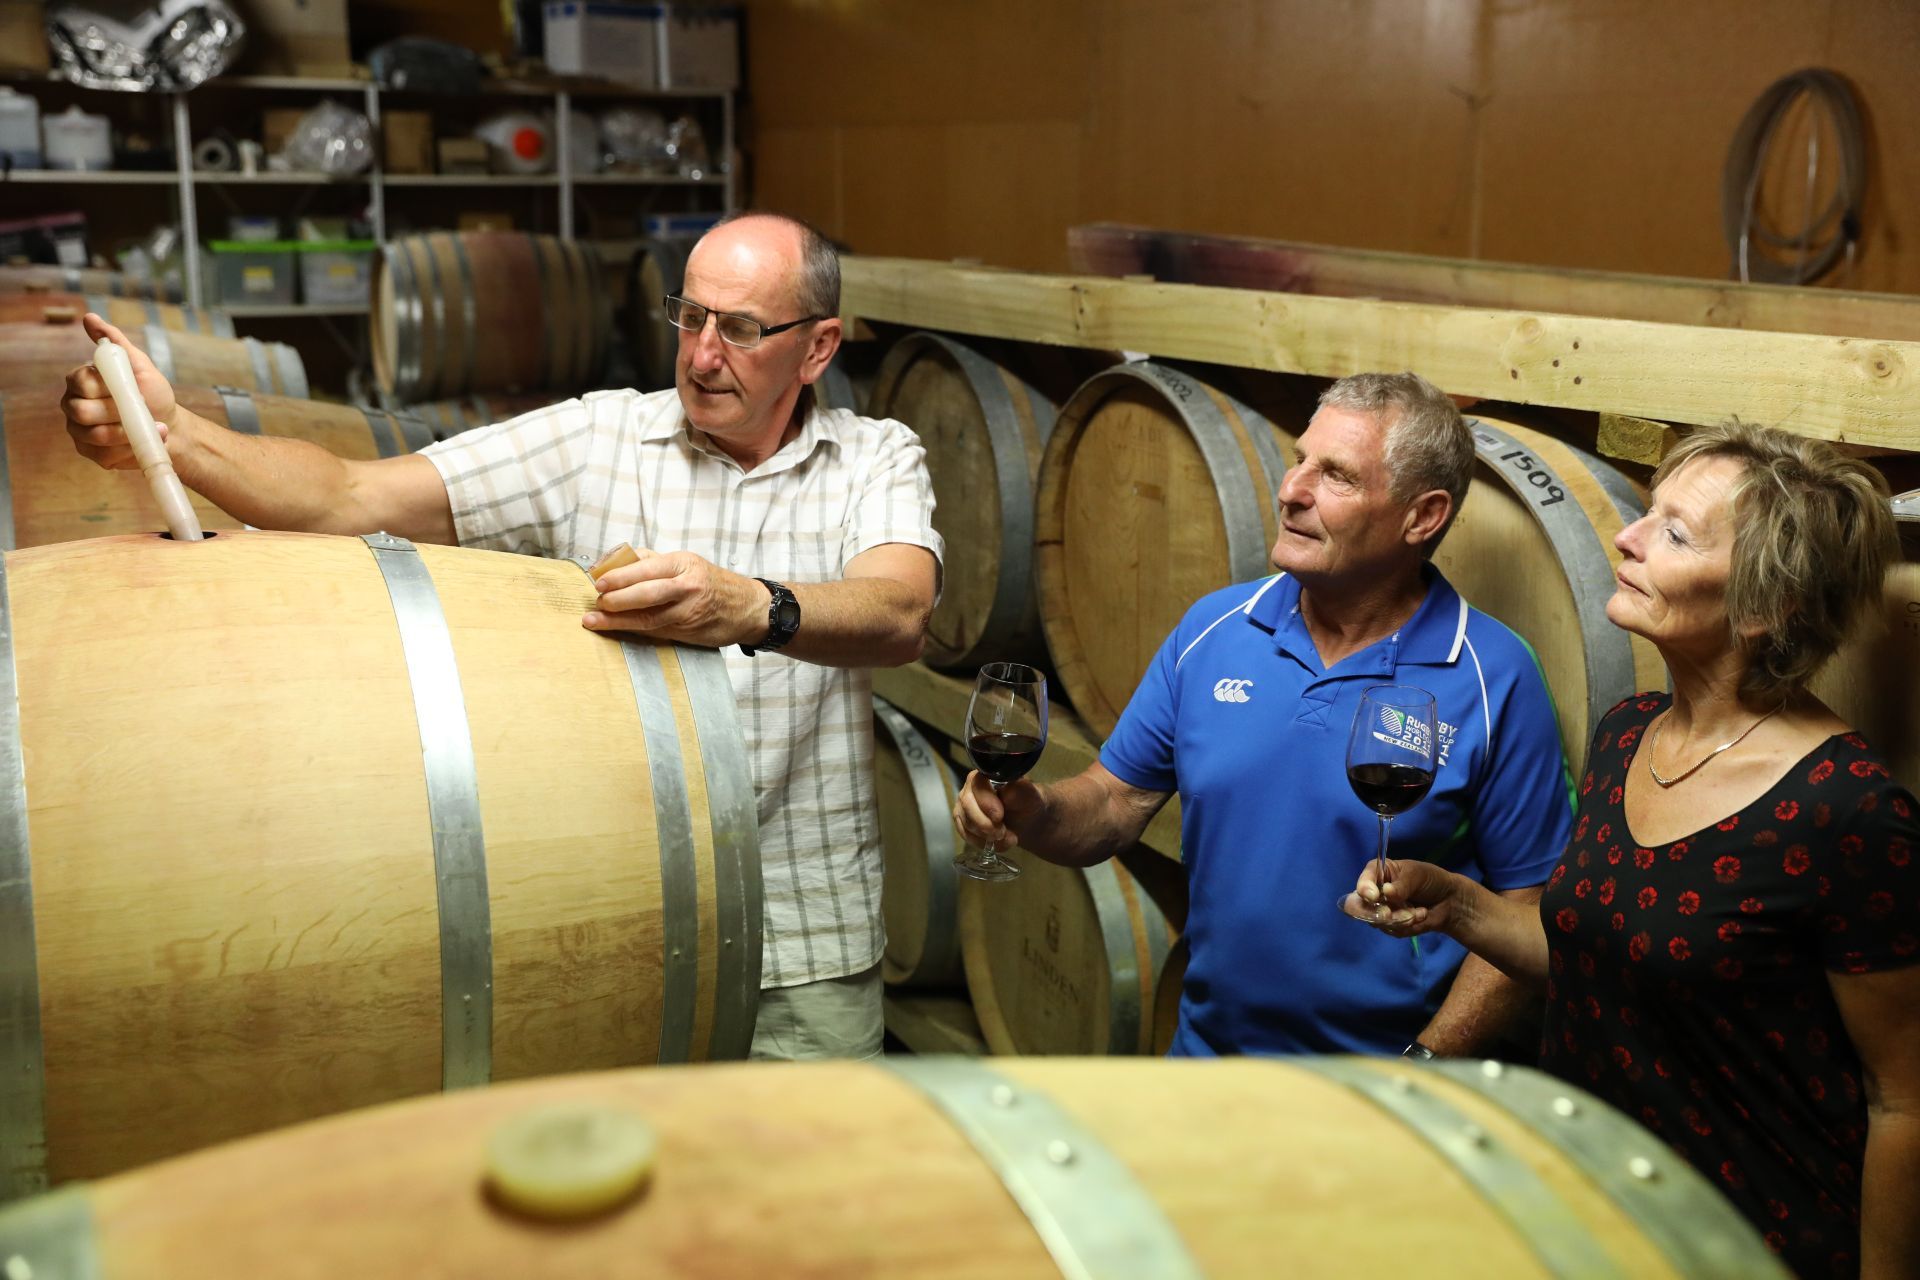 The Winemaker's Private Tour